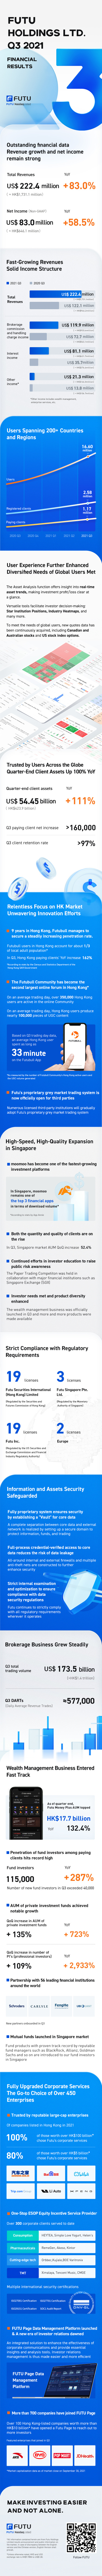 Q3 Highlights: FUTU Industry Leadership Reinforced with HK Paying Clients Up by 162%